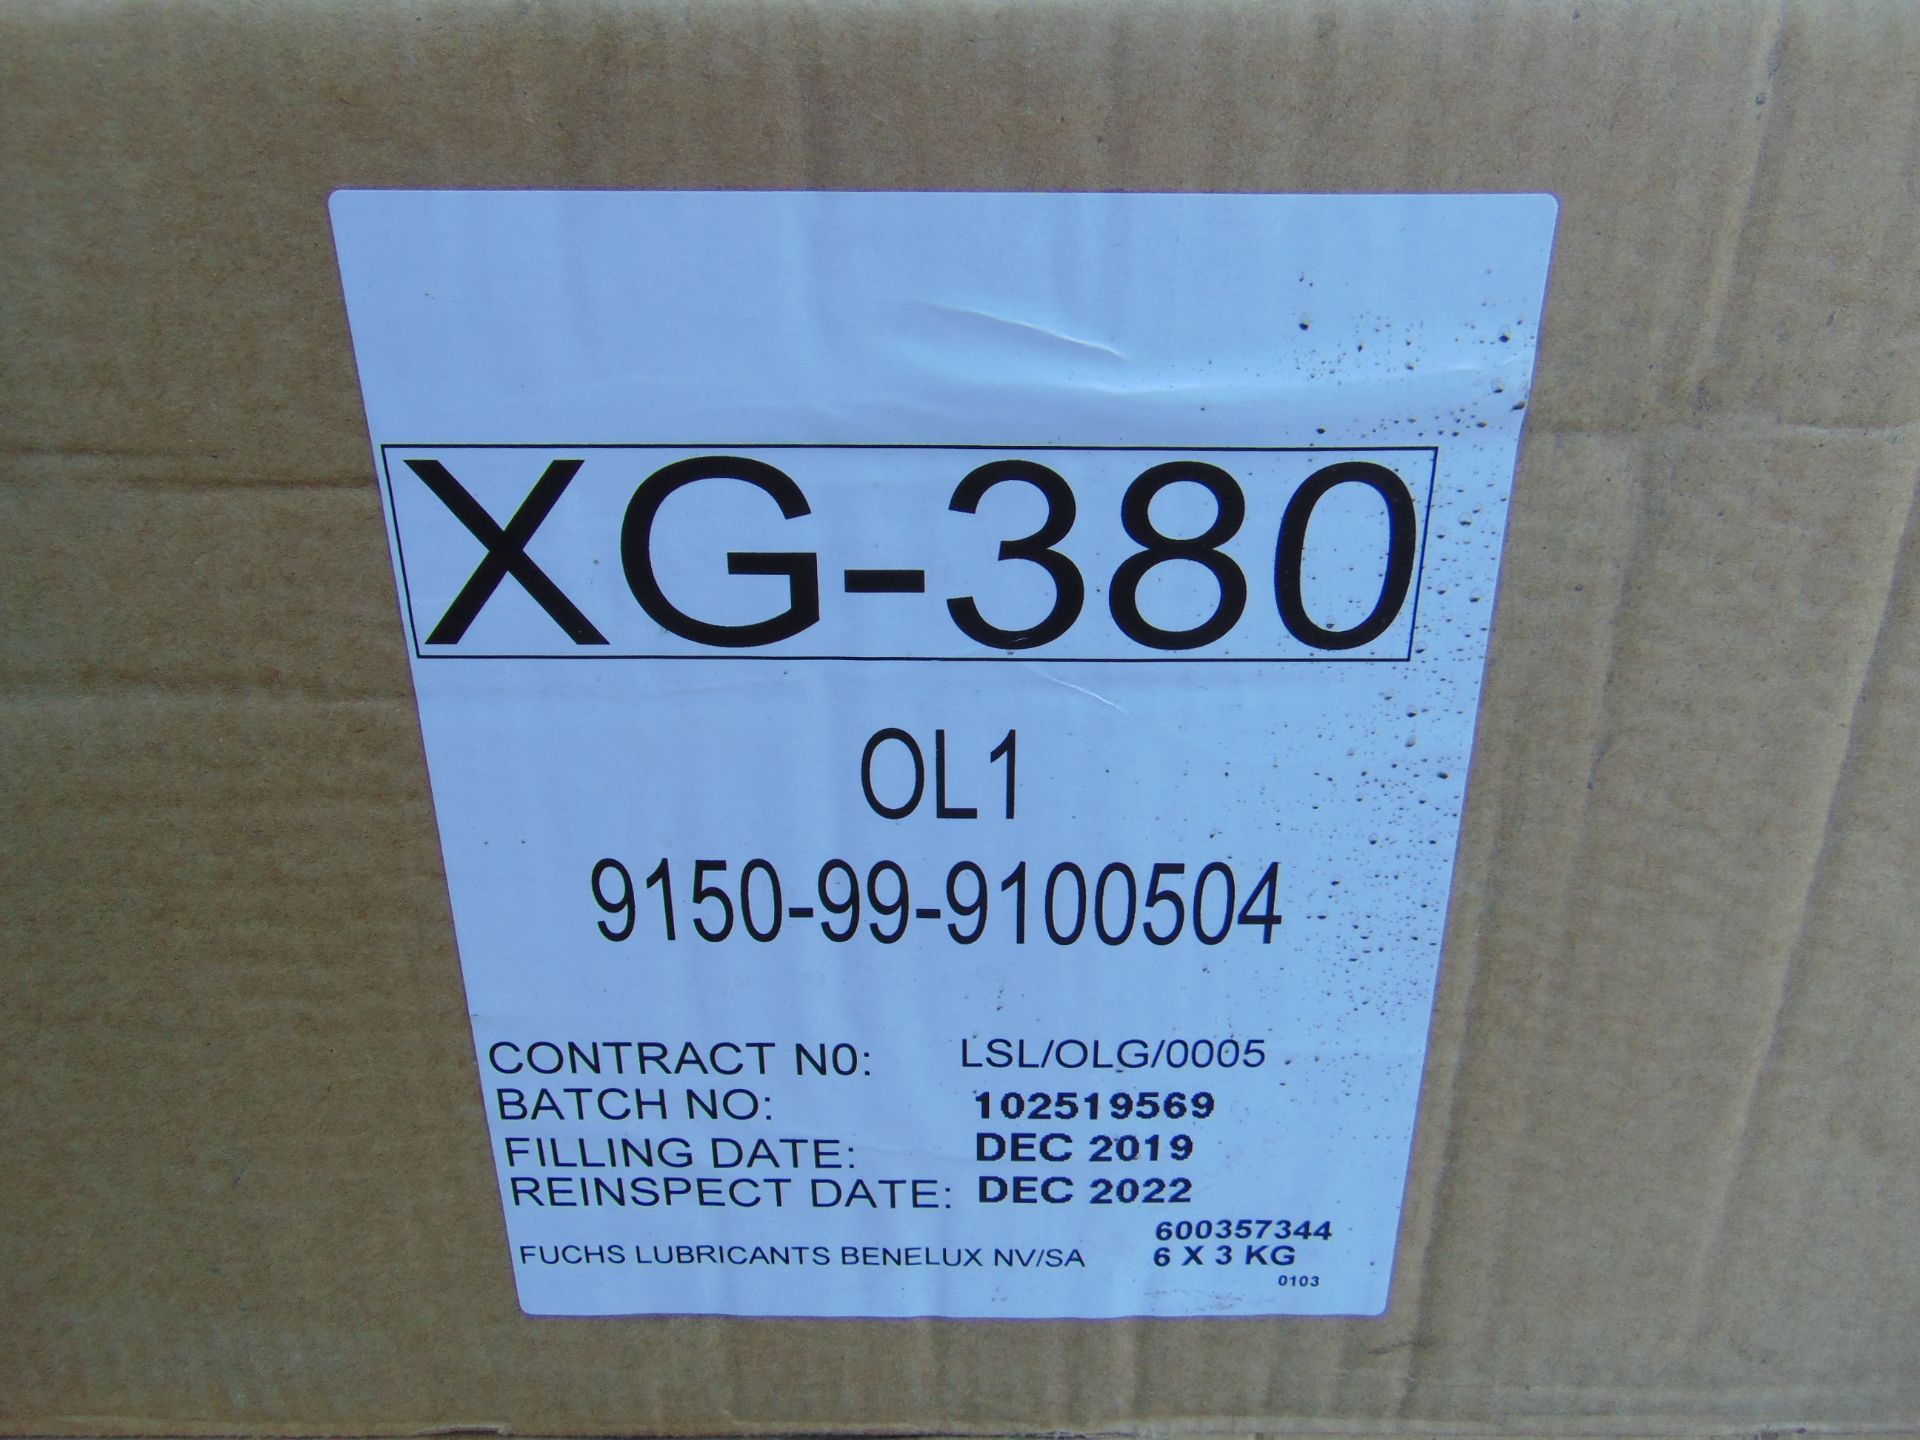 6x 3Kg Drums of XG-380 Grease for use at high temperatures for high bearing loads - Bild 2 aus 3